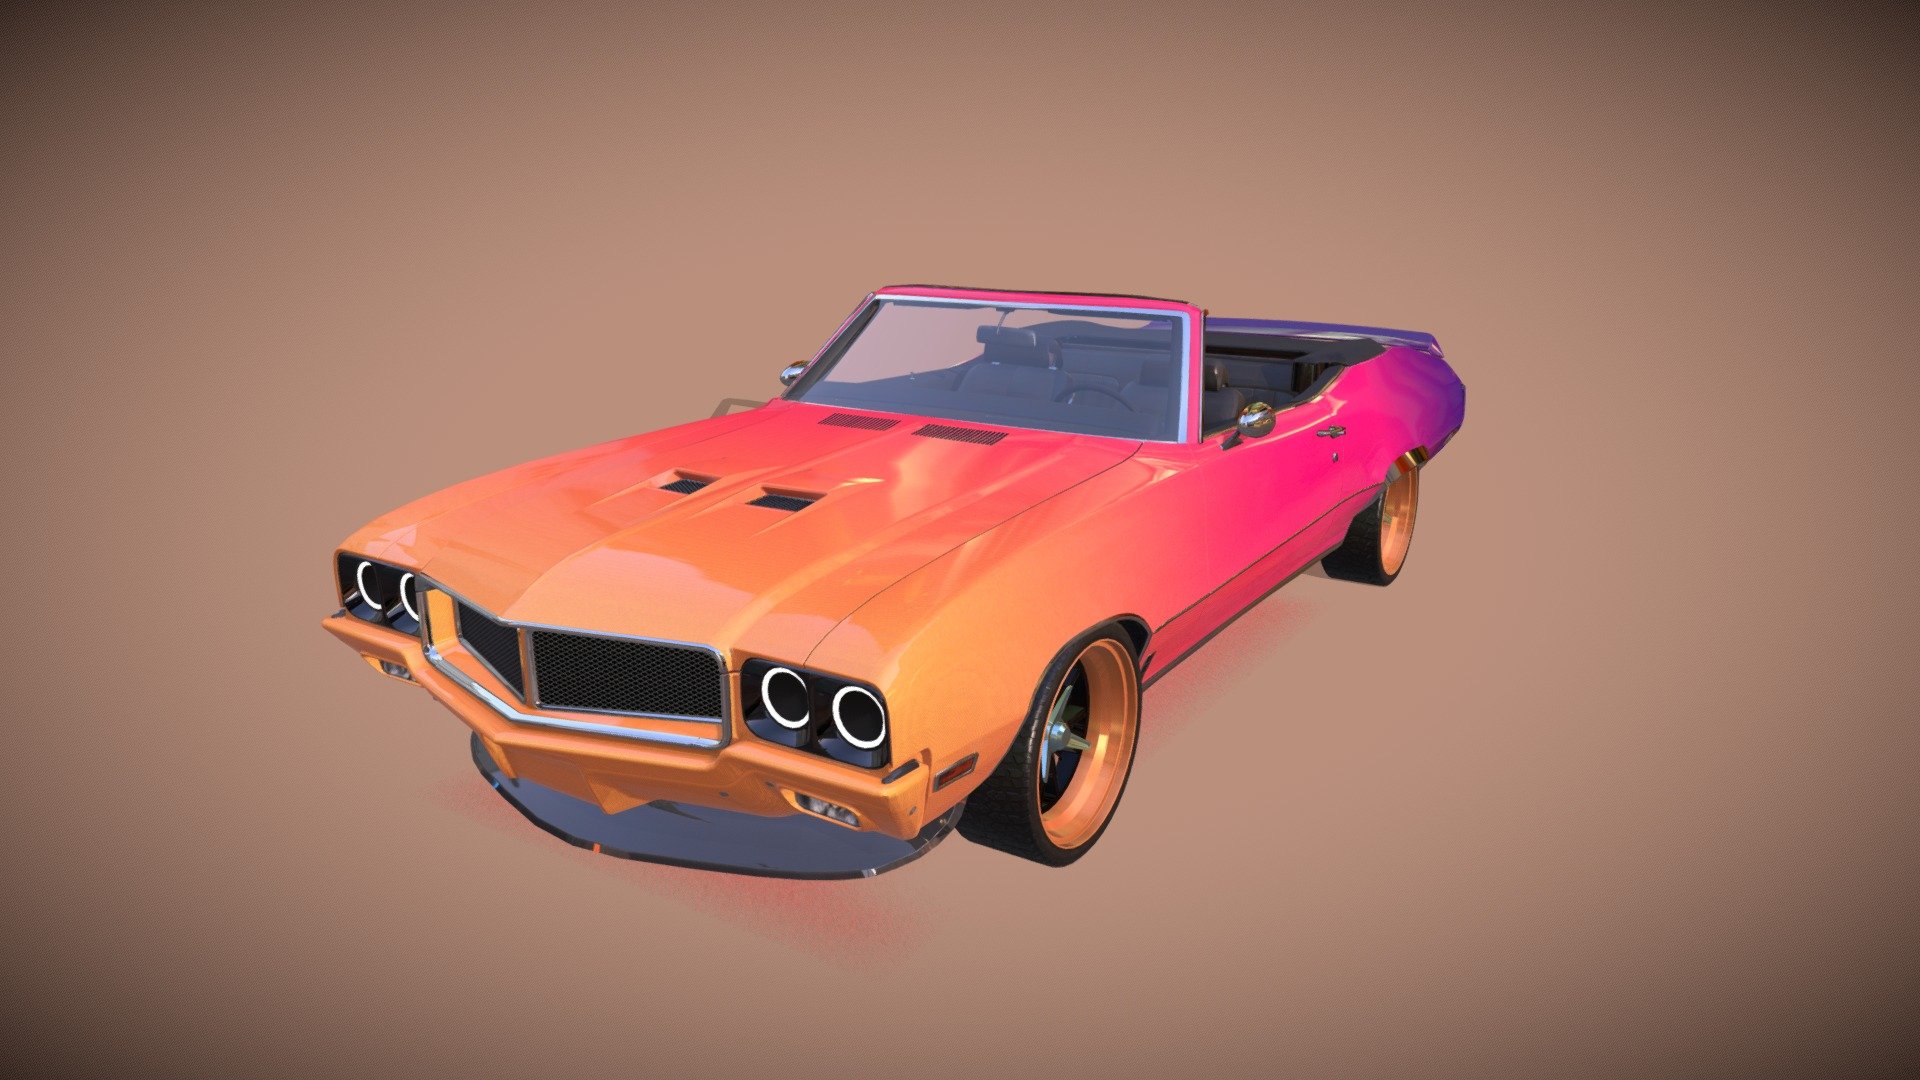 Muscle car Buick Cabriolet with visualized engine and interior

Wheels Shelby cs69

Made for mobile game

Made in Blender 2.82 textured in Substance Painter - Buick GS Convertible - 3D model by Sobakef (@horron) 3d model